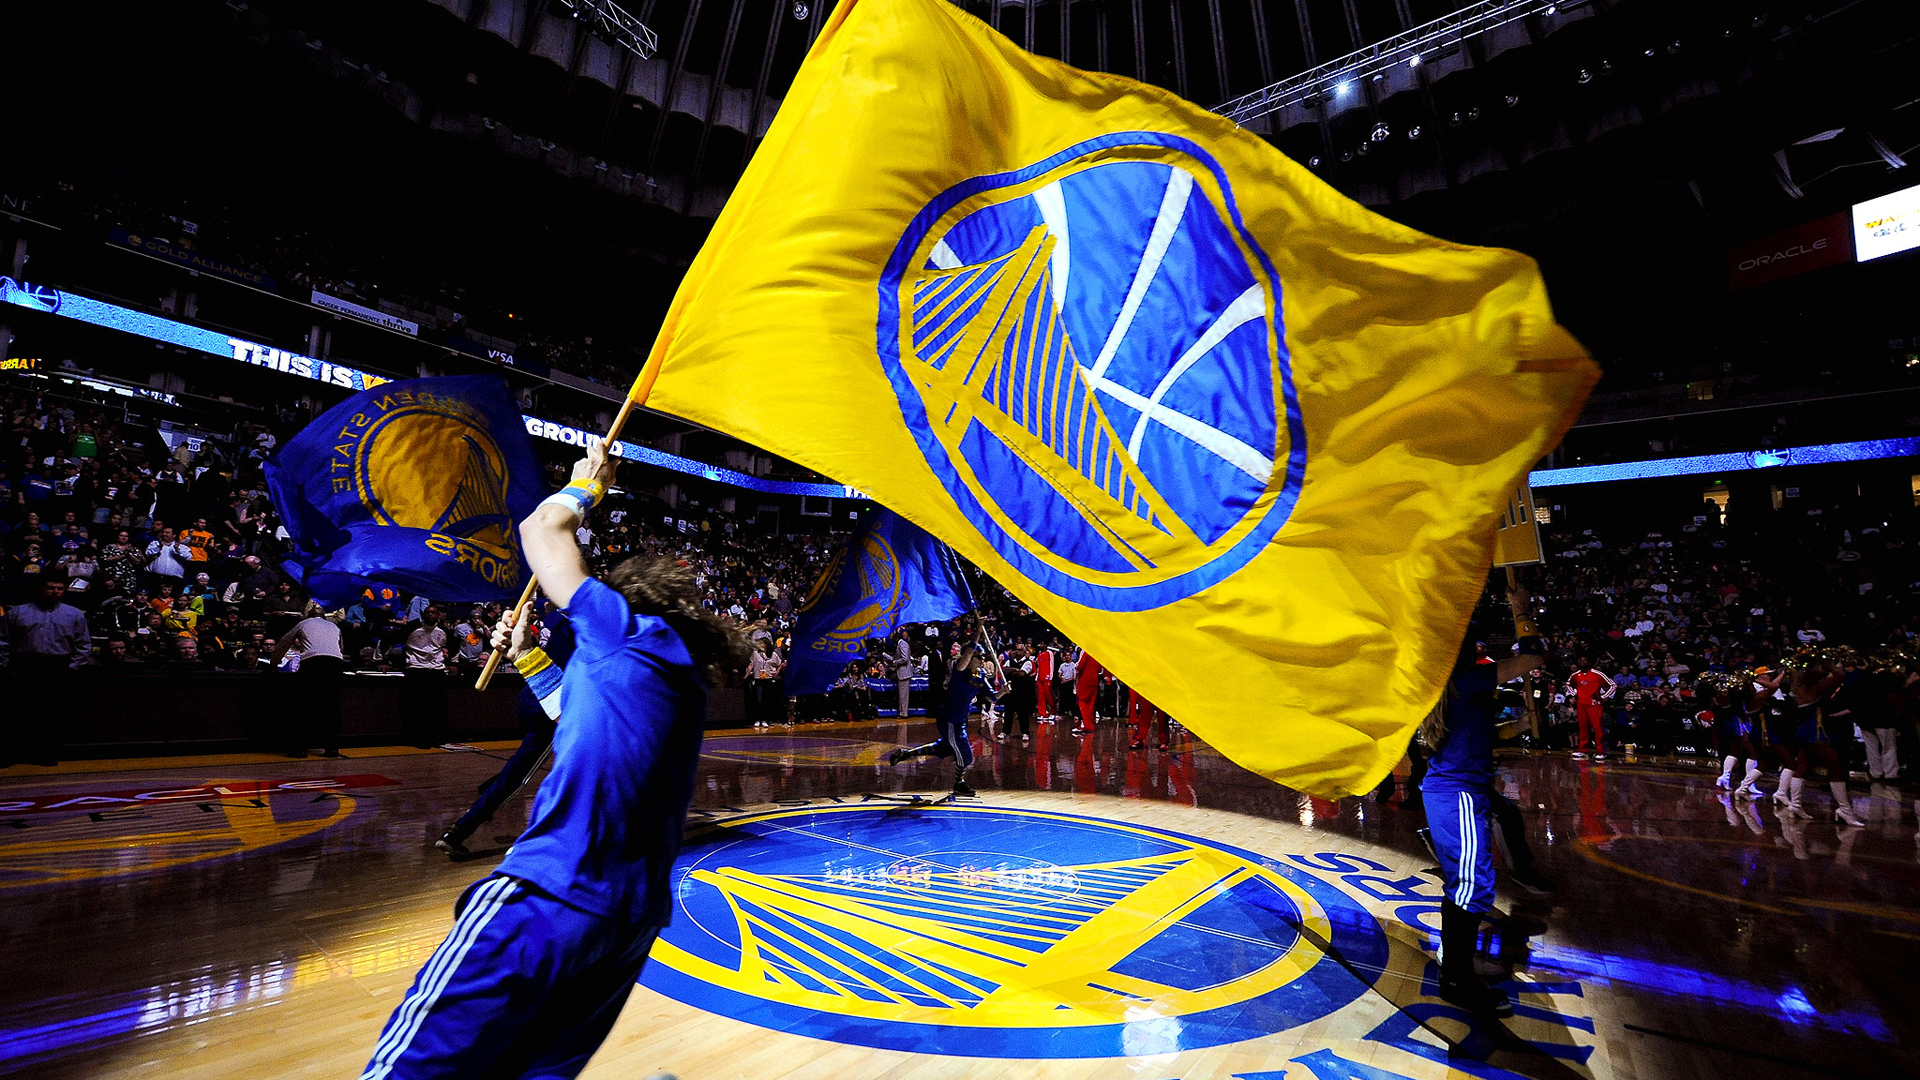 Golden State Warriors Wallpapers Images Photos Pictures ...